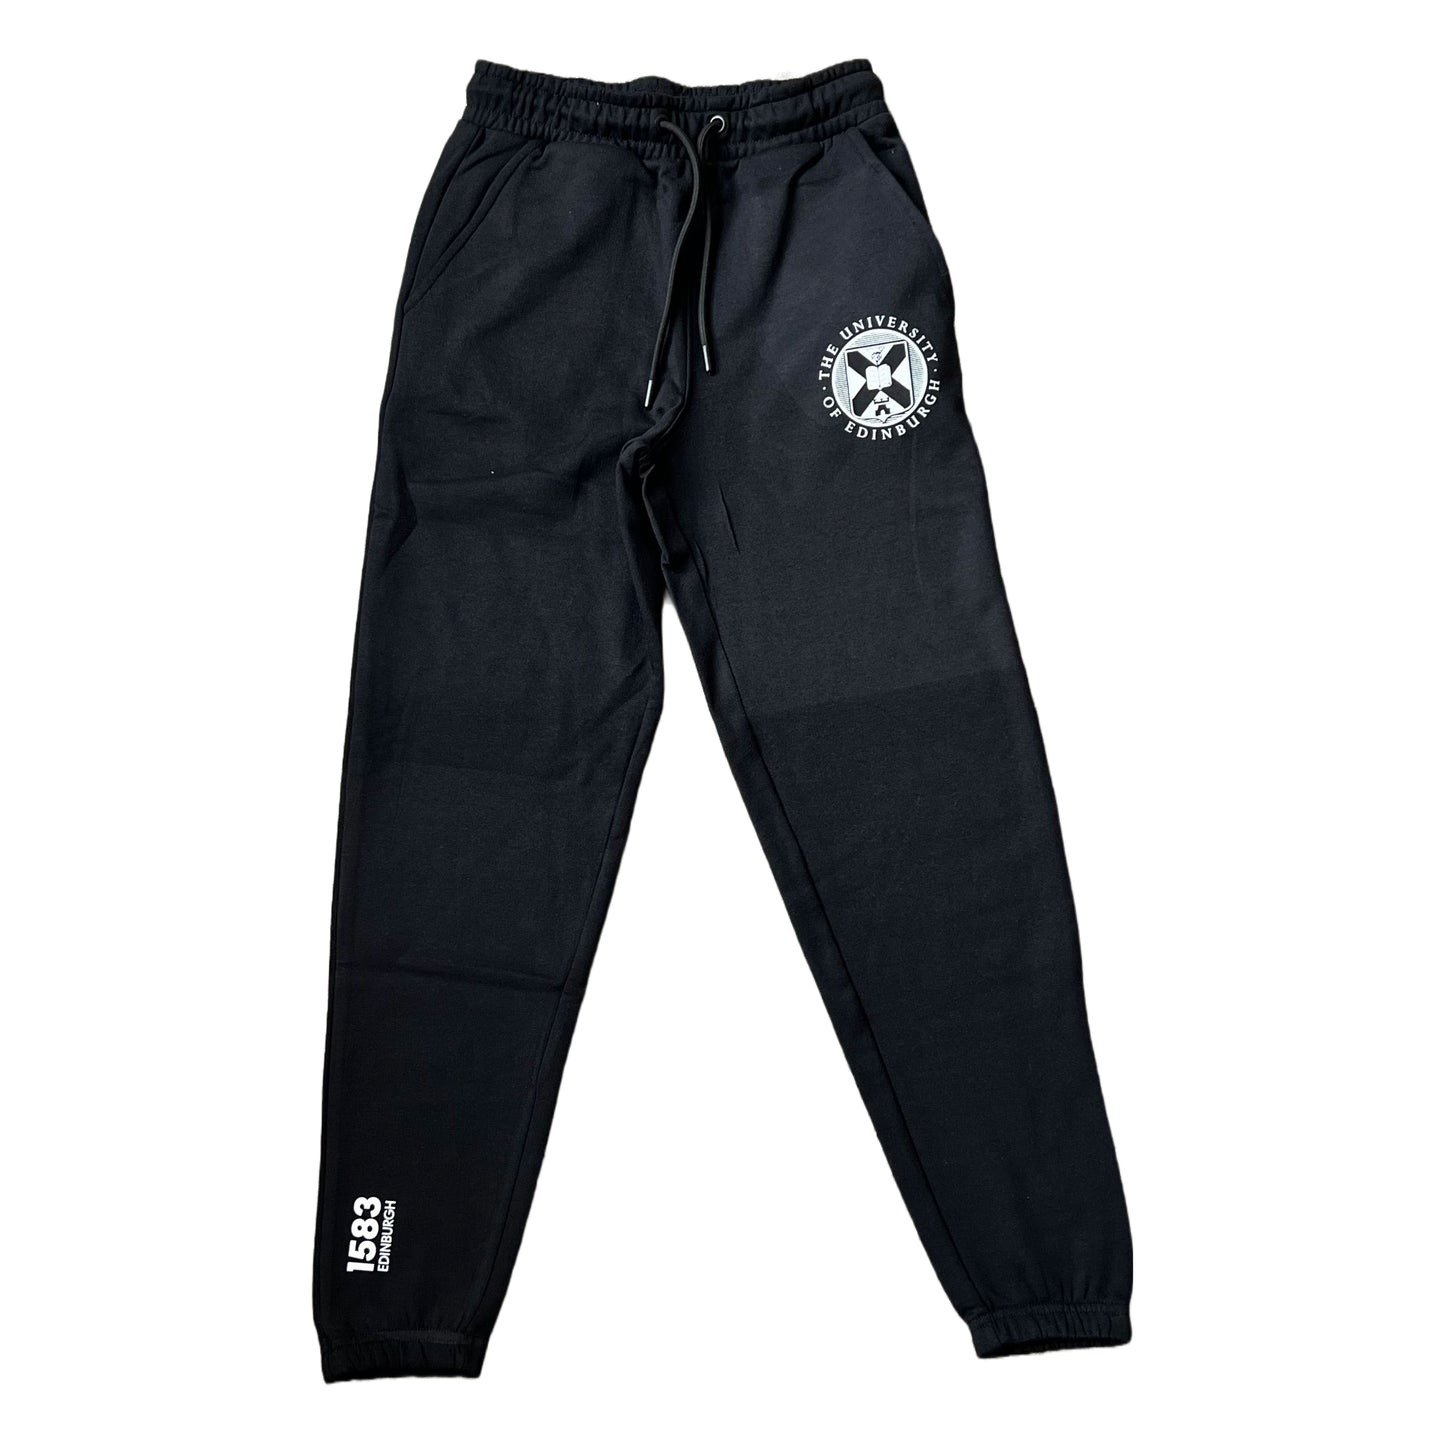 Black jogging bottoms featuring the university crest in white and "1583 Edinburgh" in white text